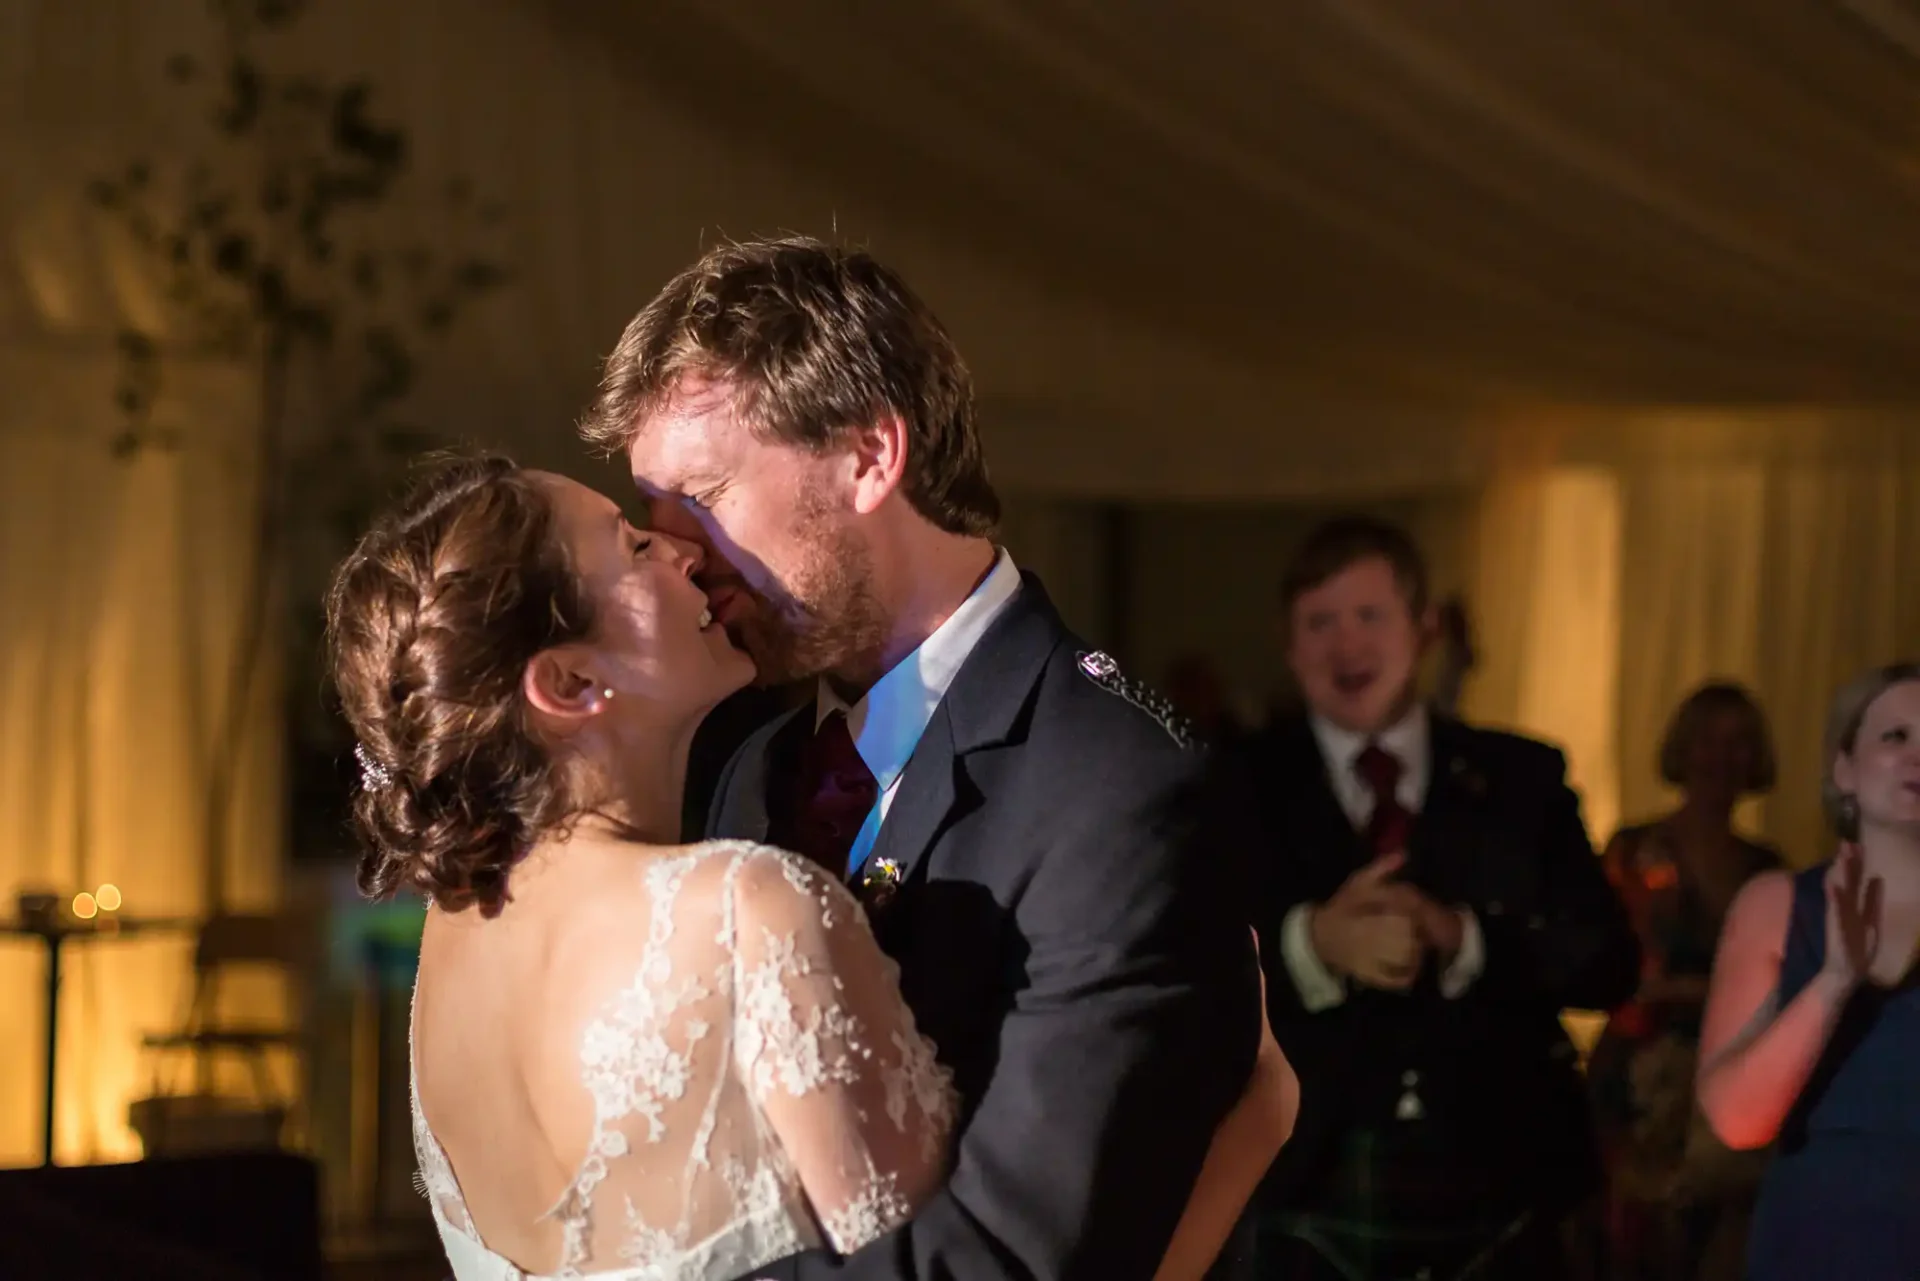 A newlywed couple kissing on the dance floor under a tent, surrounded by applauding guests in soft, warm lighting.